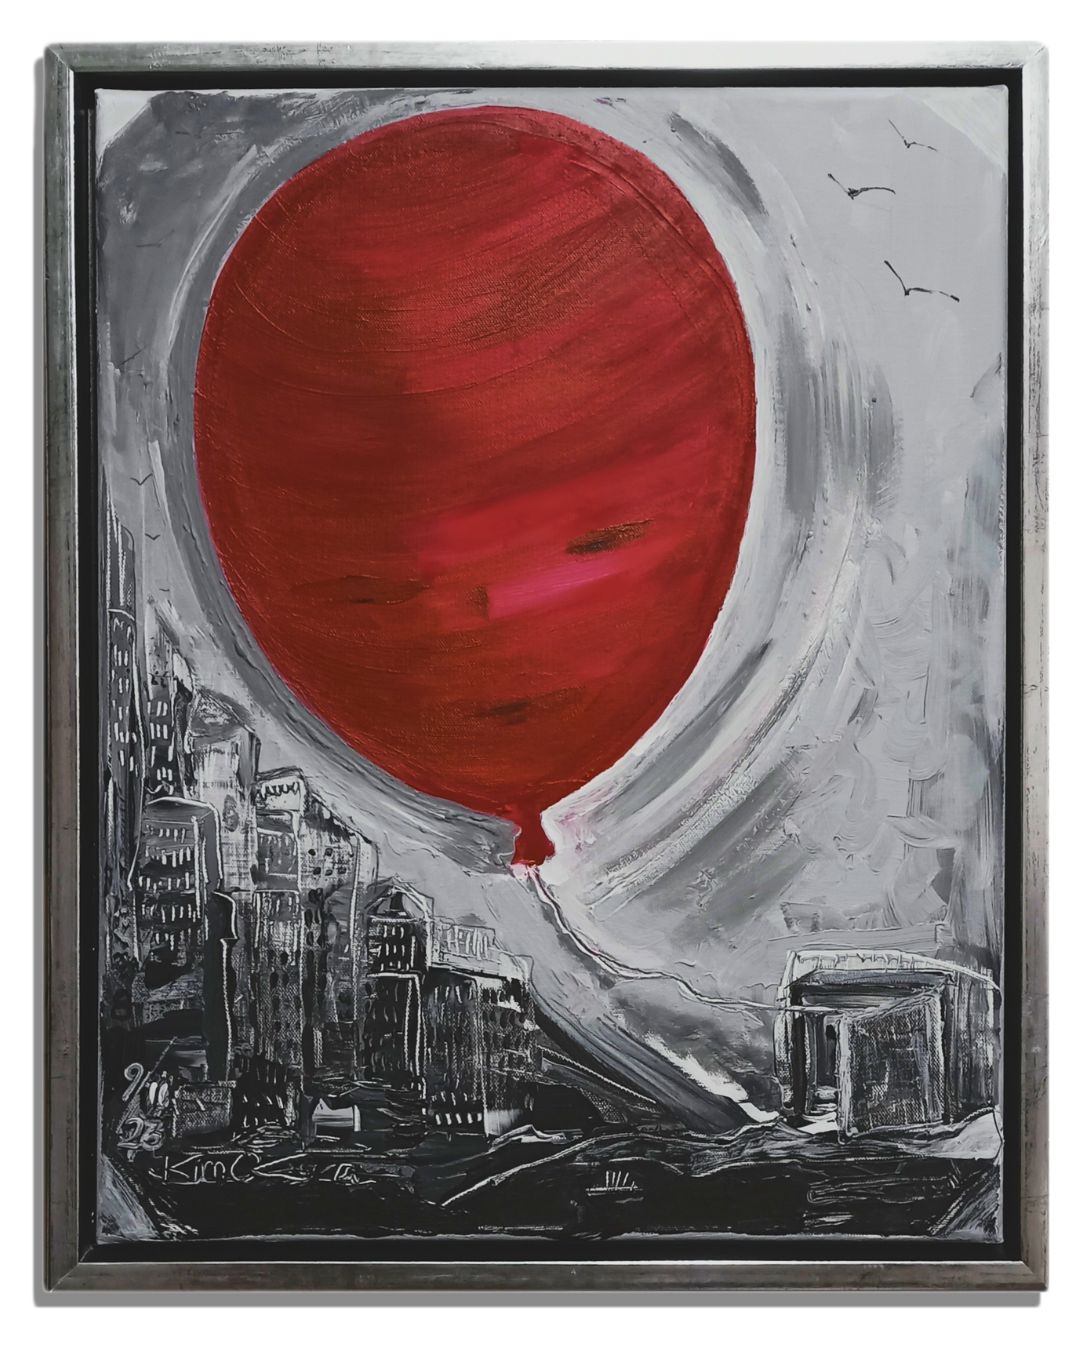 Artwork J.D. - Joy for Dina - An eerie red balloon resembling a mummy's head, floating above a city, the string of the balloon leads to a half-open door painted in the lower right corner of the picture, clear night, eerie atmosphere - Kim Okura, Vienna, November 2023, Gift for Dina J. 